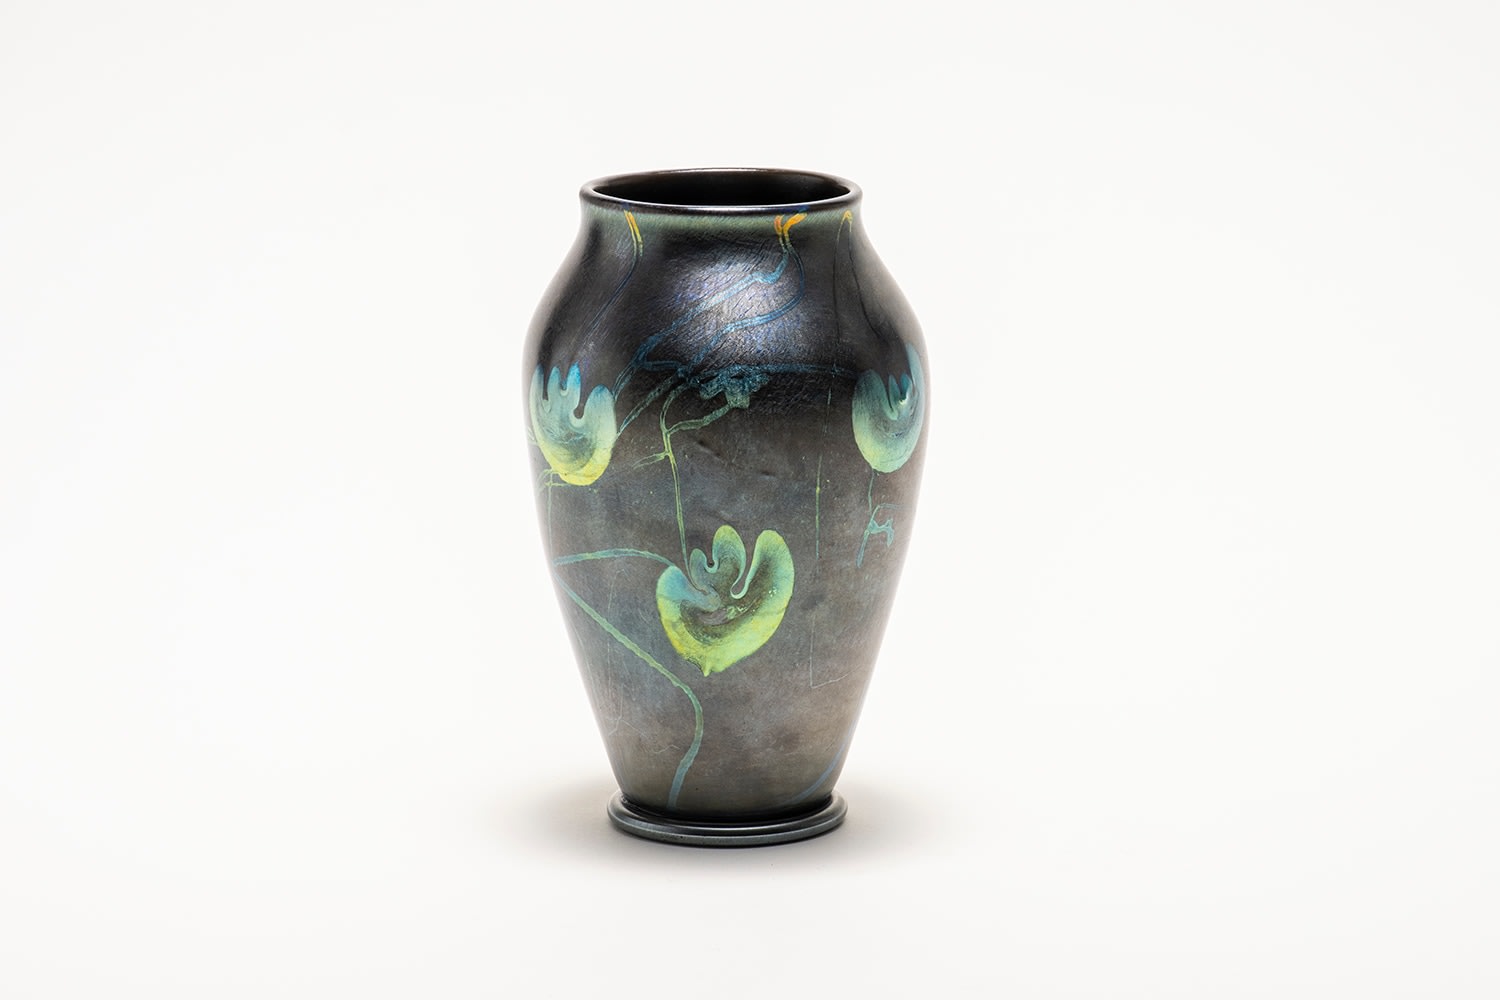 a footed tiffany glass vase in silvery gunmetal glass with iridescent decoration of swirling vines and leaves in silvery blue-green